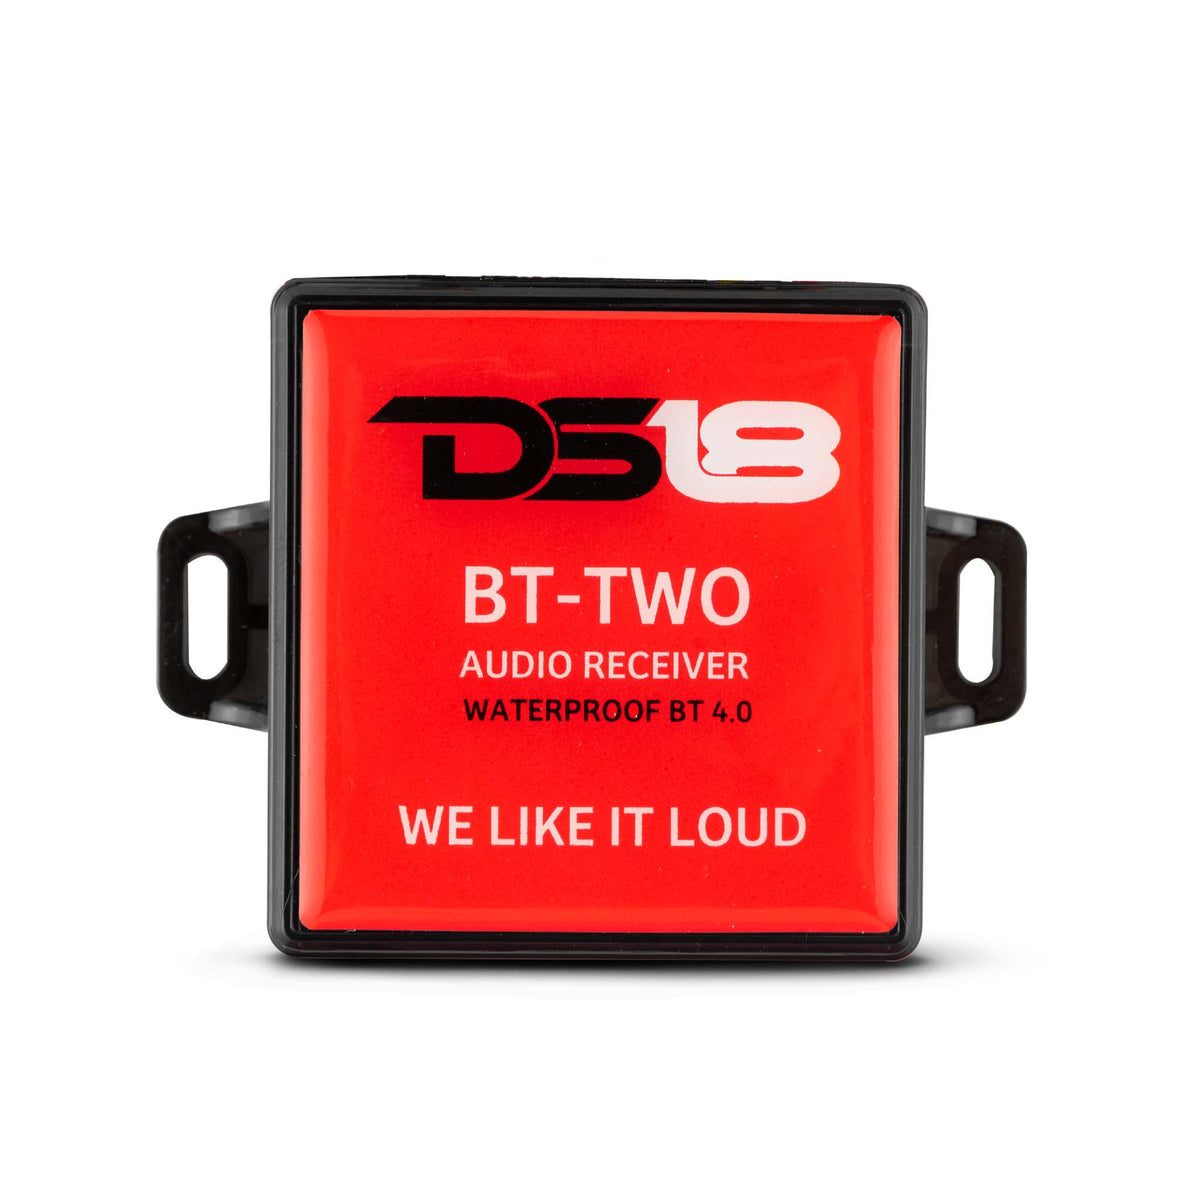 DS18 BT-TWO Bluetooth Audio Receiver Works w/Android & iPhone